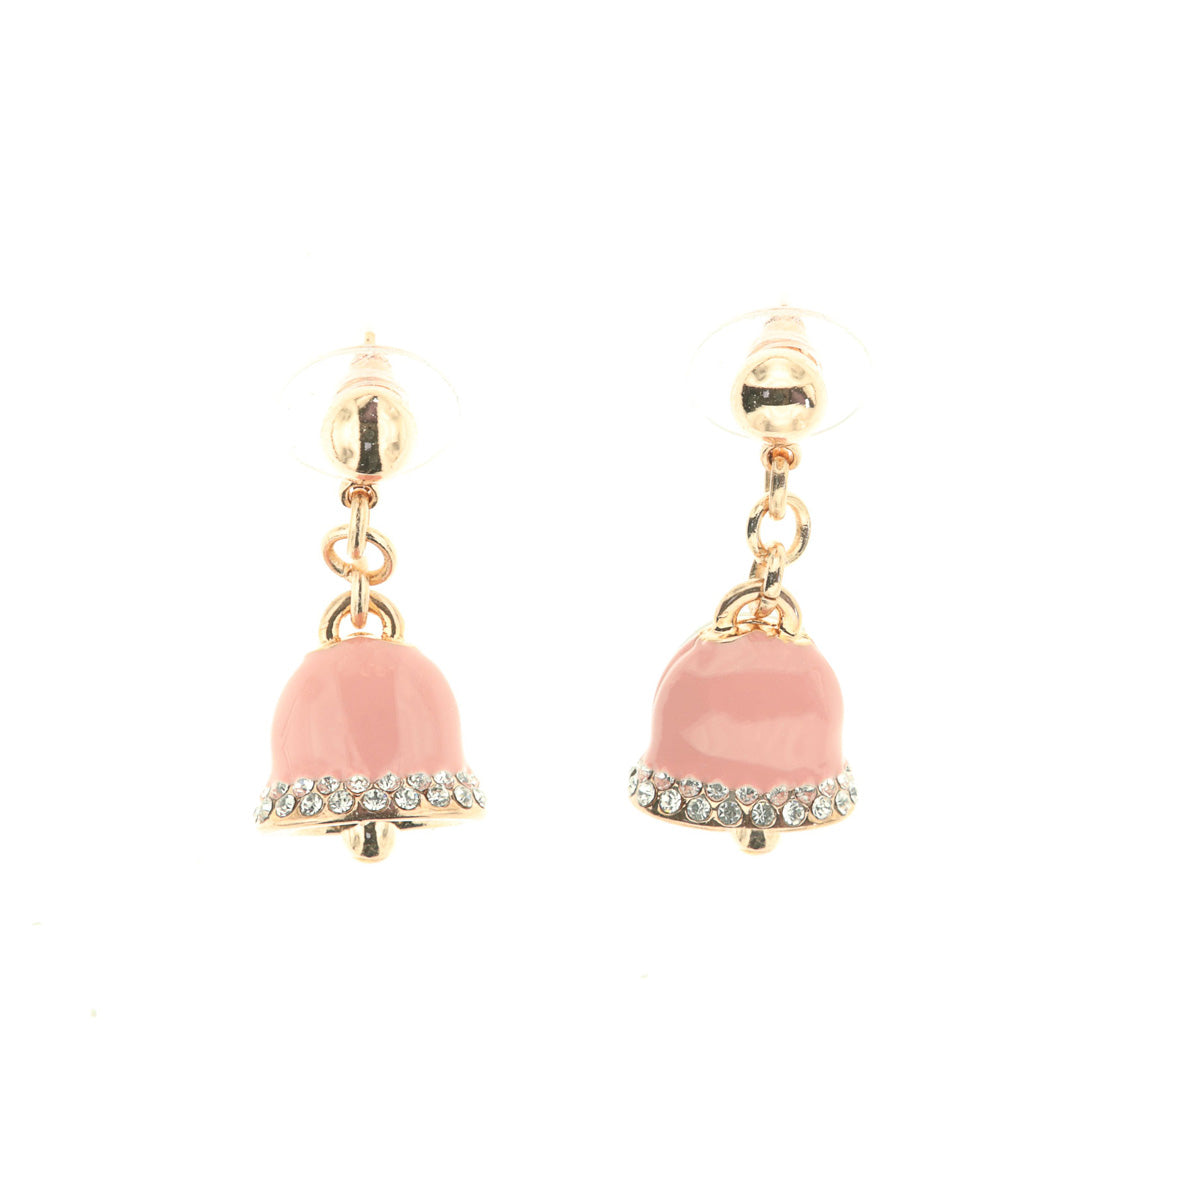 Metal earrings with pink glazed charming bells and white crystals